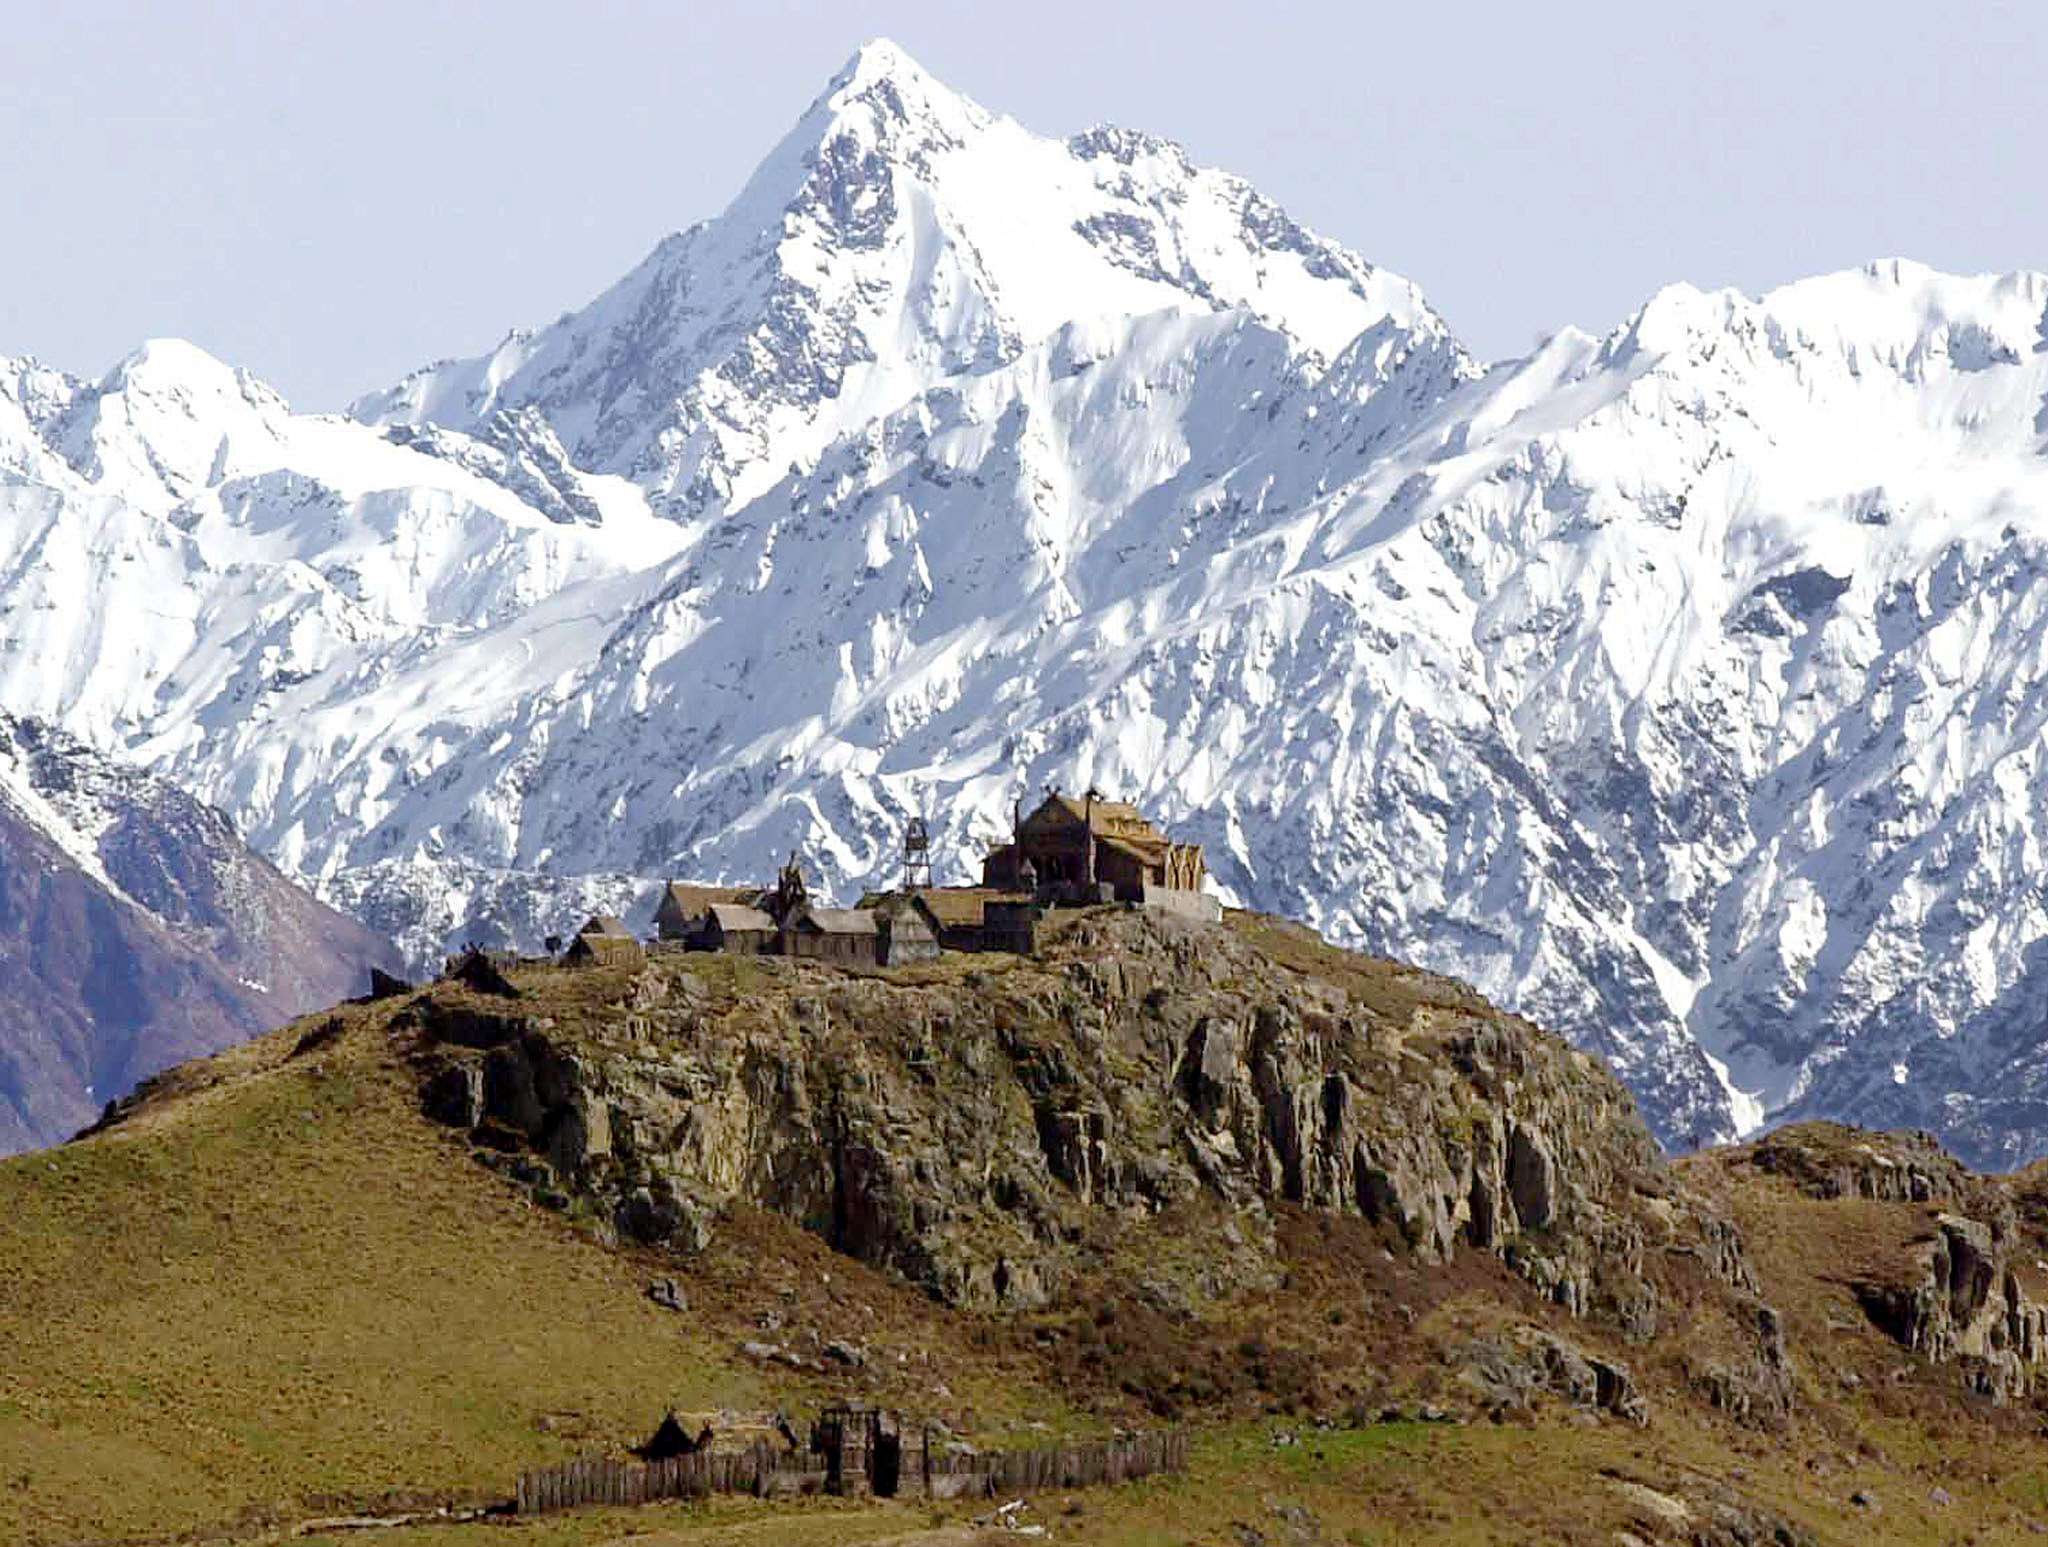 The set of the movie "The Fellowship of the Ring" sits atop a hill in front of Mt. Sommers on New Zealand’s South Island, where a handful of companies are harvesting air to sell to China. Photo: Reuters